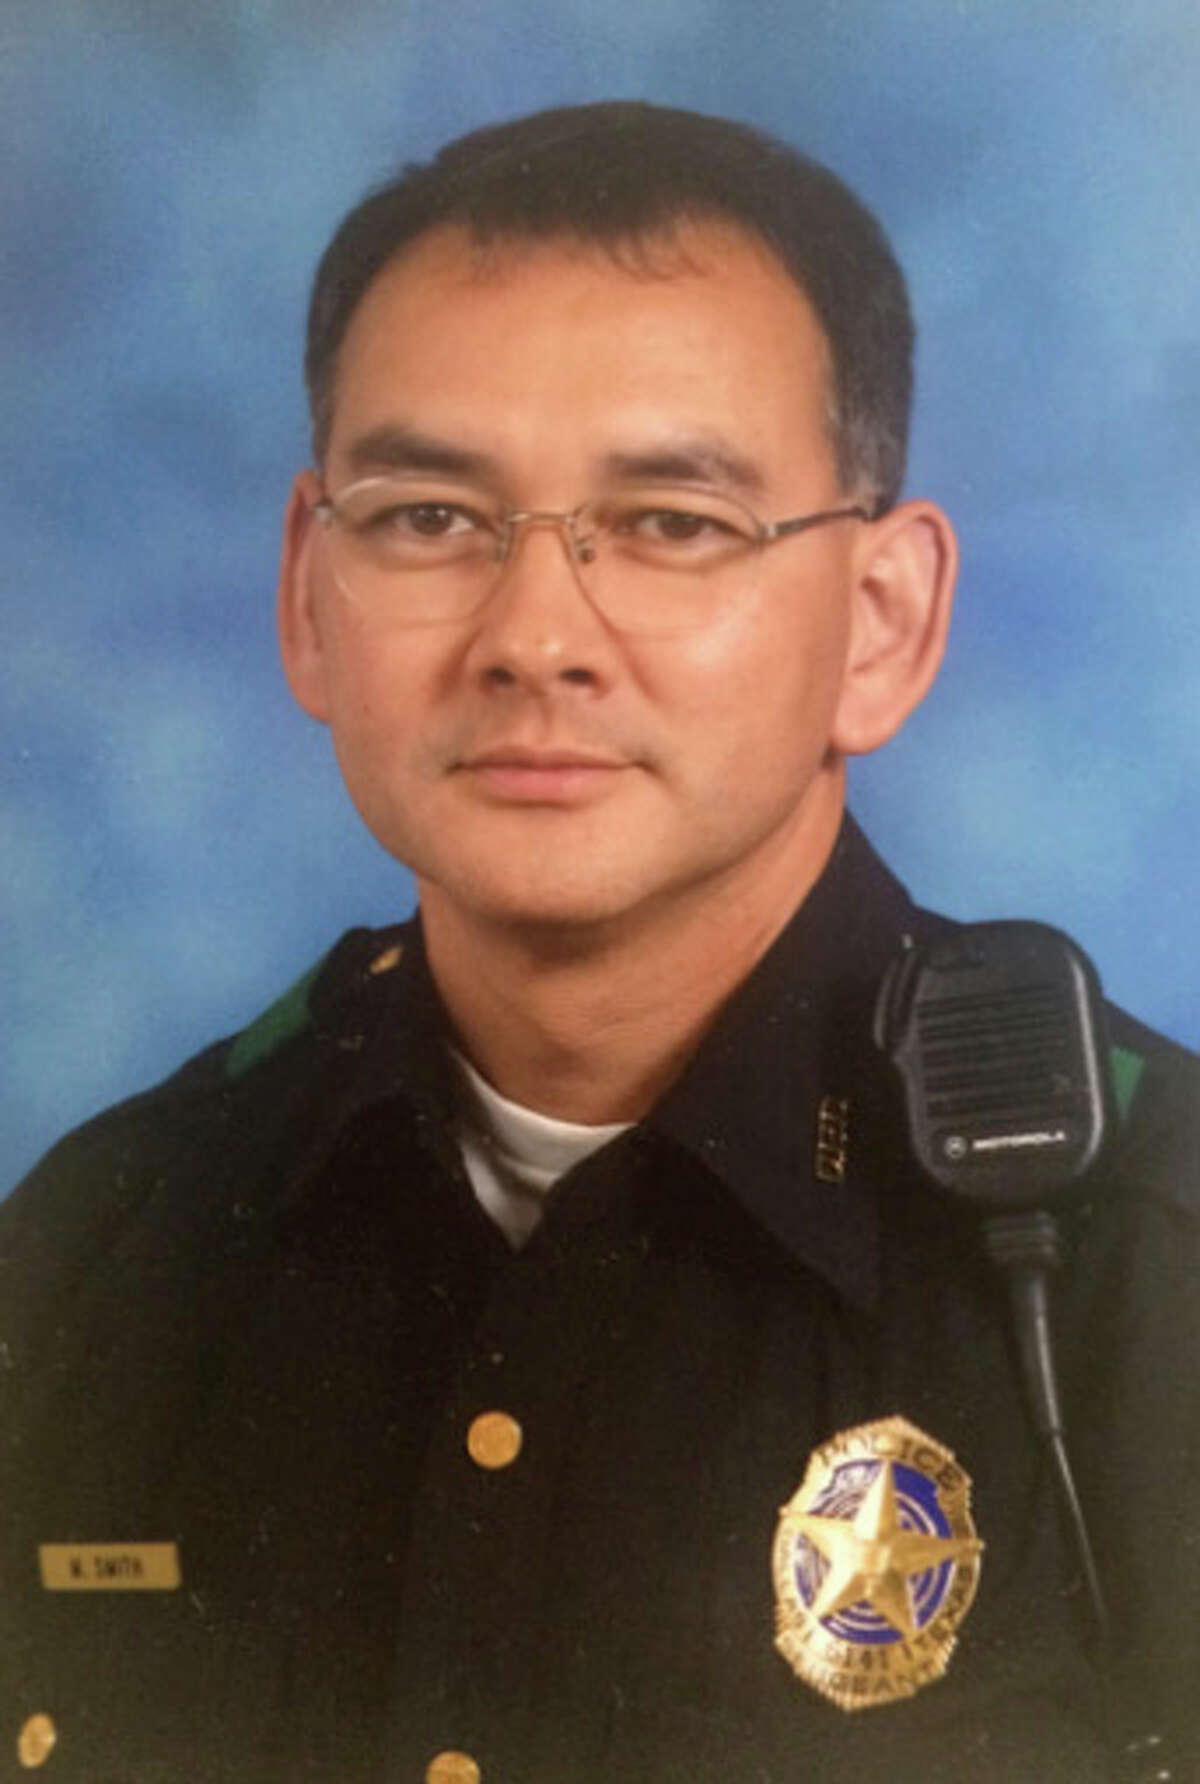 Sgt. Michael J. Smith, Dallas police department, was killed in an ambush attack in downtown Dallas, July 7, 2016. Photo provided by the Dallas Morning News